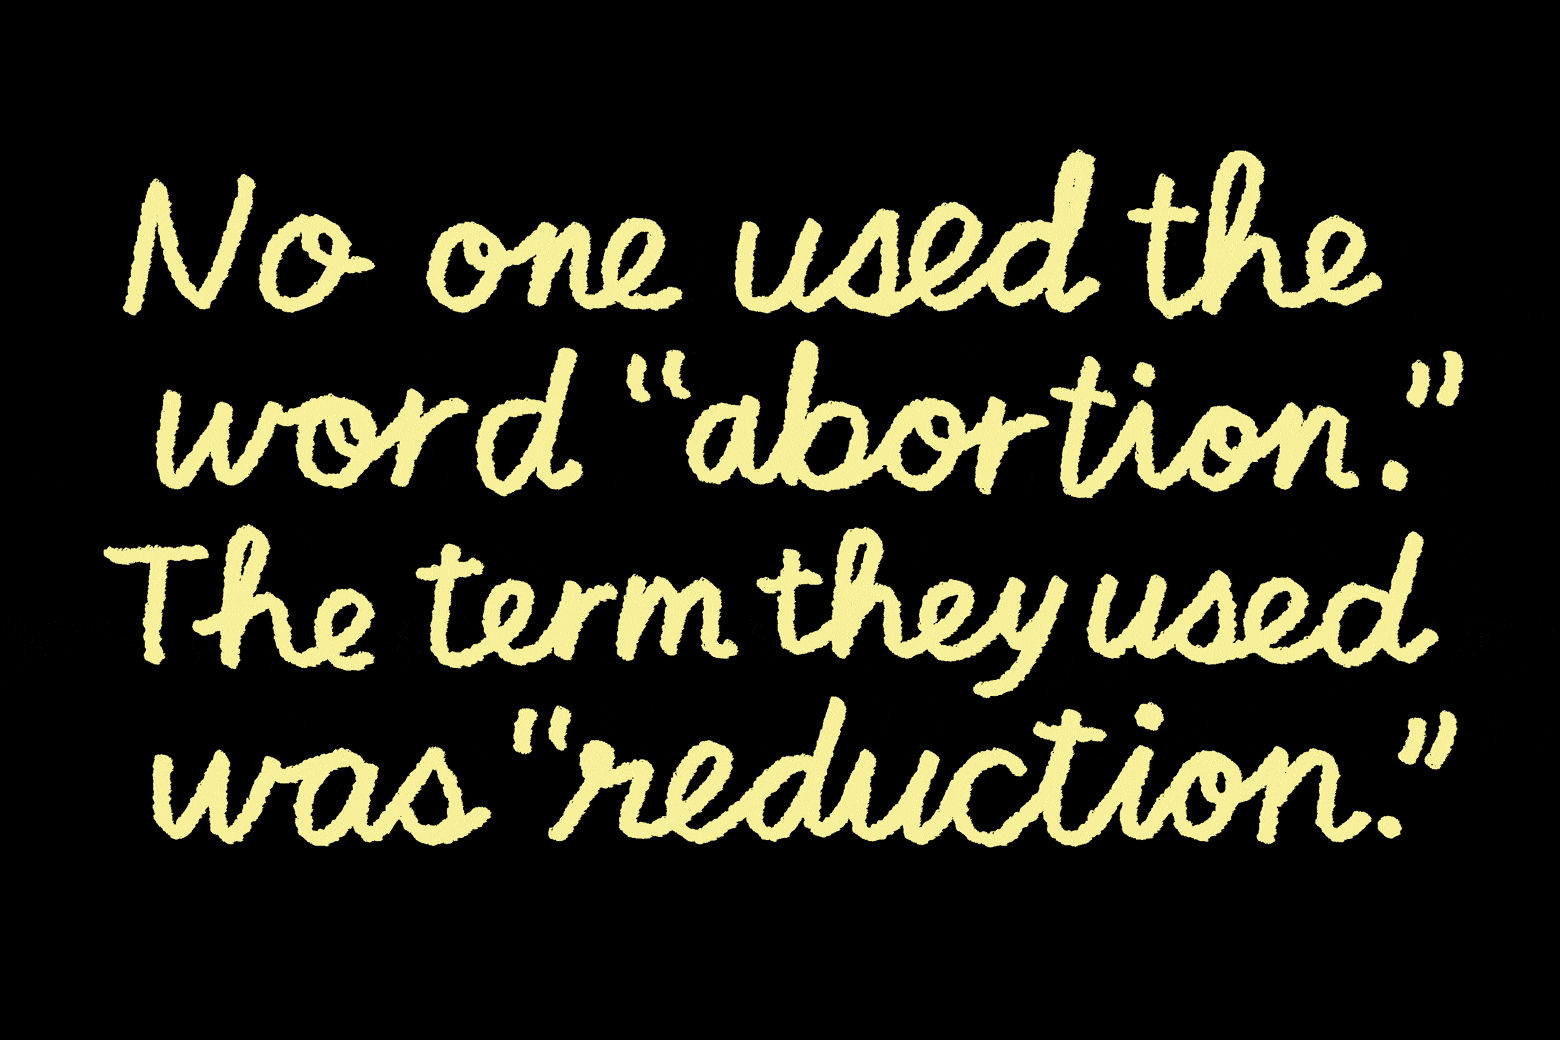 "No one used the word 'abortion.' The term they used was 'reduction.'"